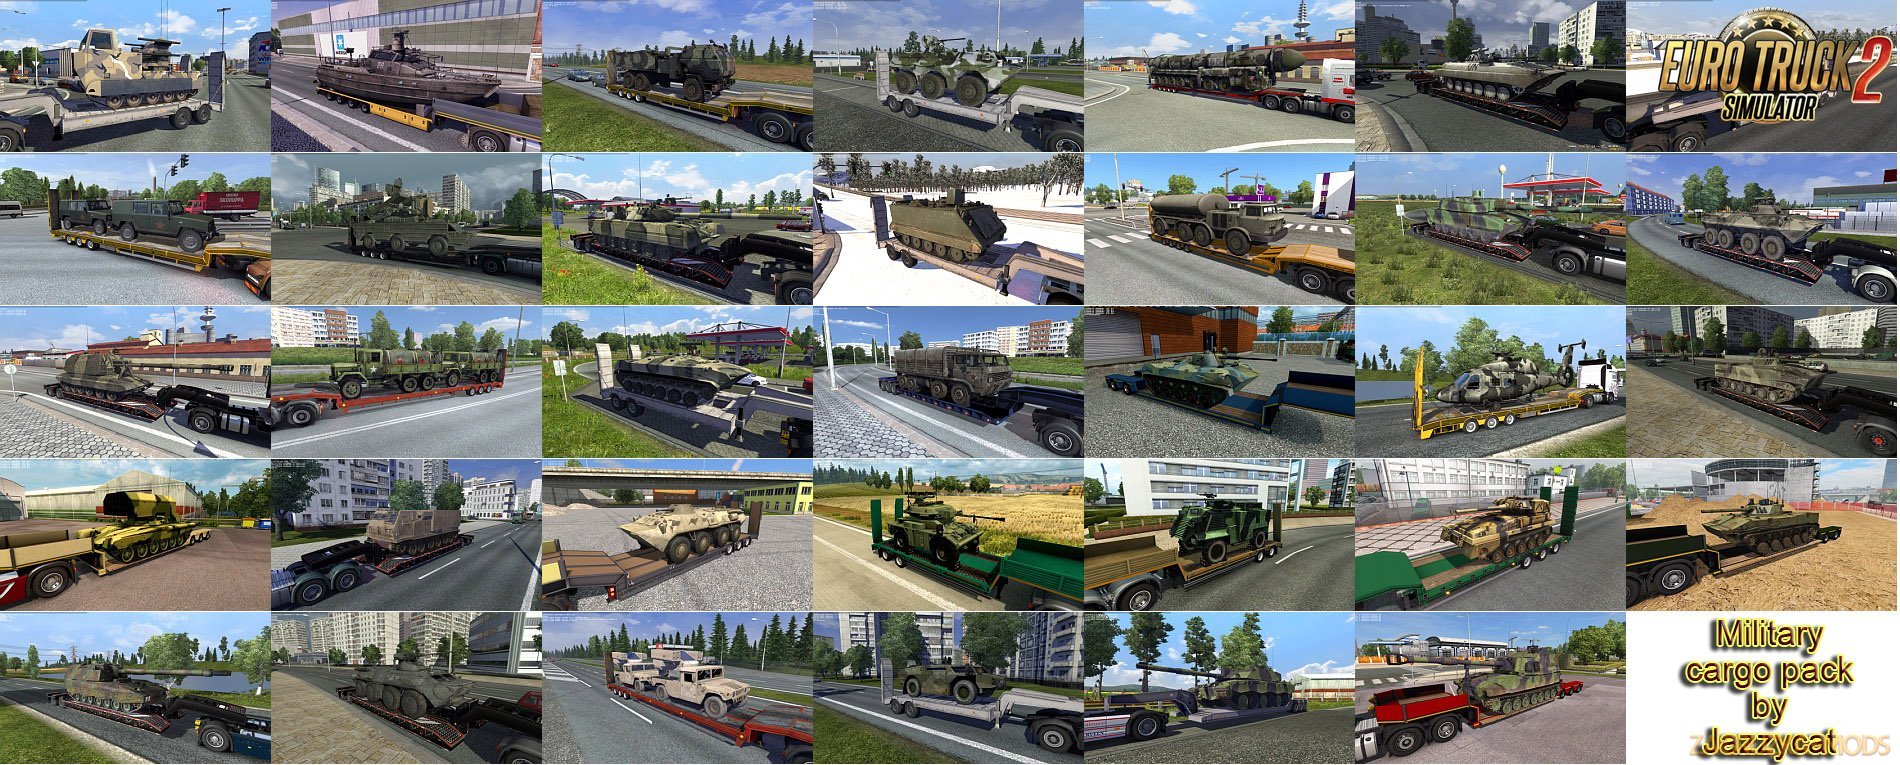 Fix 2 for Military Cargo Pack v2.4.1 by Jazzycat